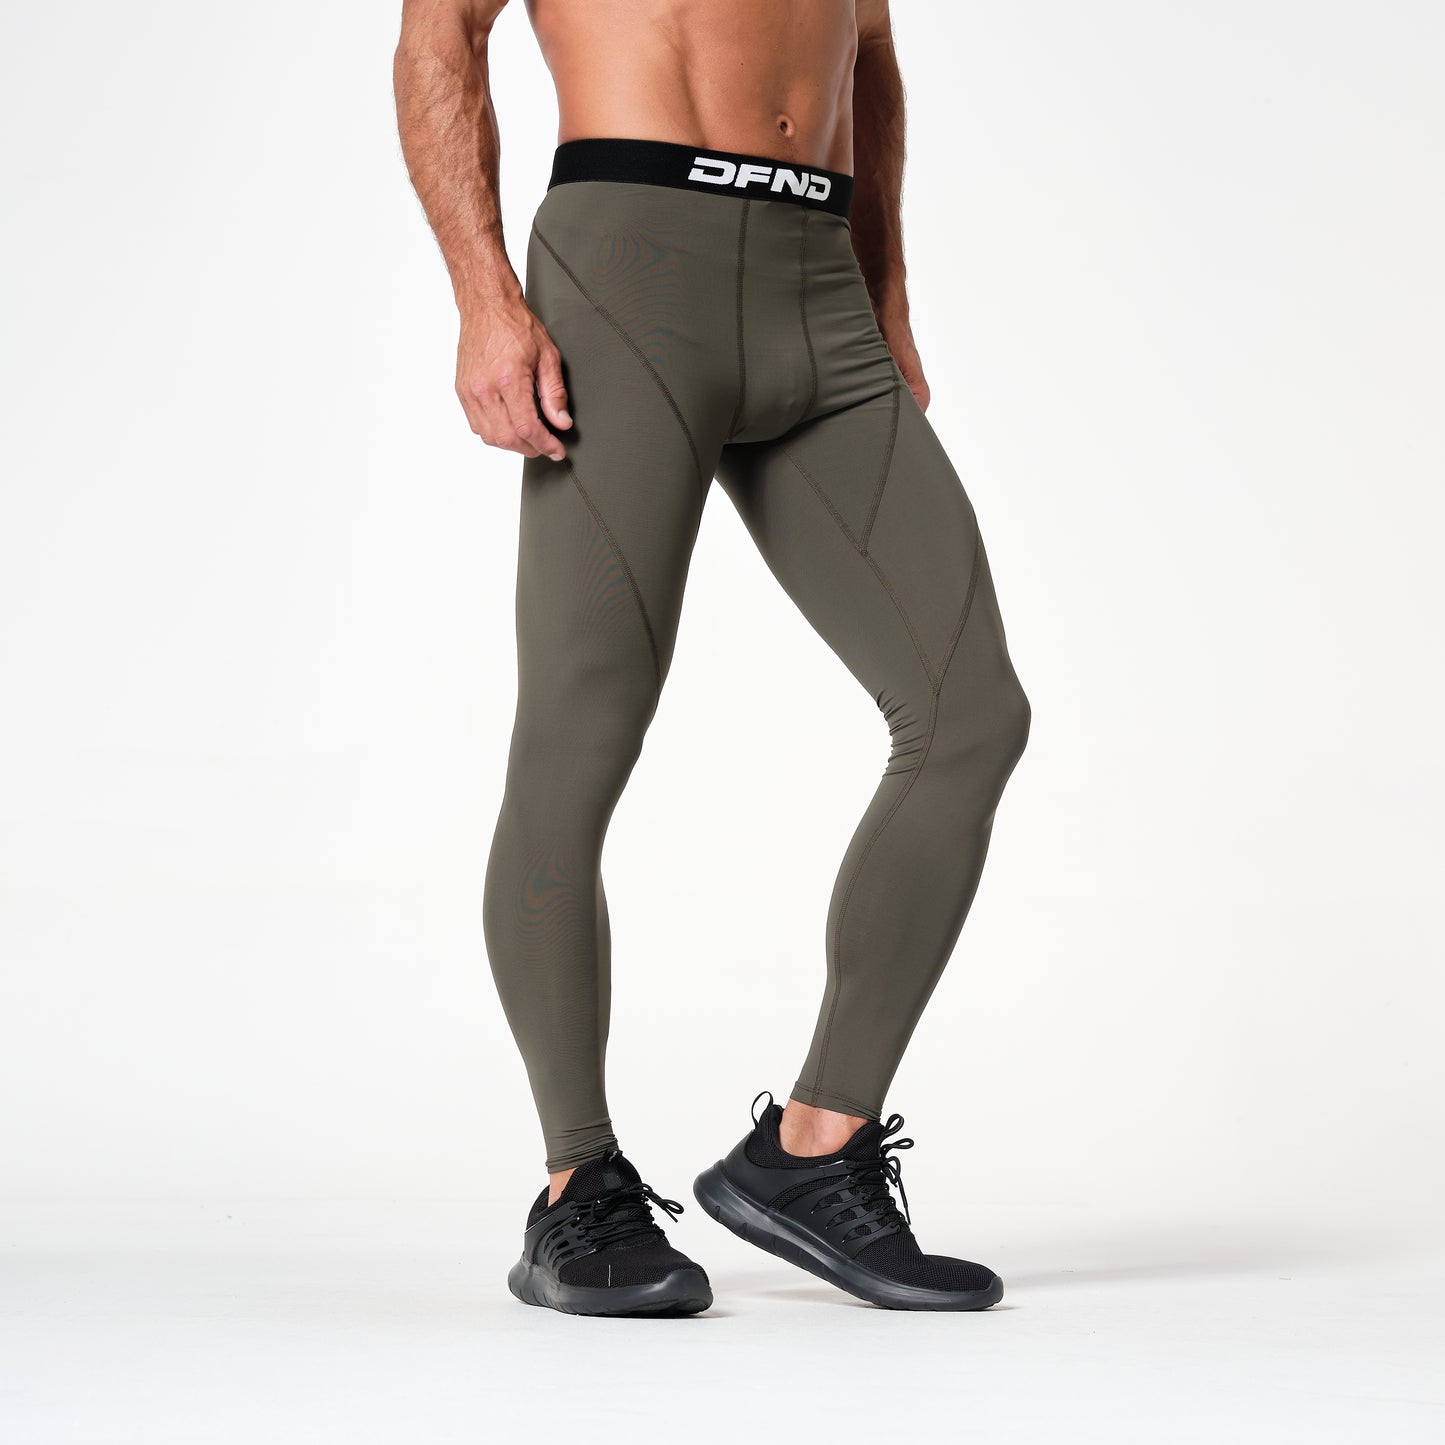 RECOVERY COMPRESSION PANTS – BLACK - Gioca